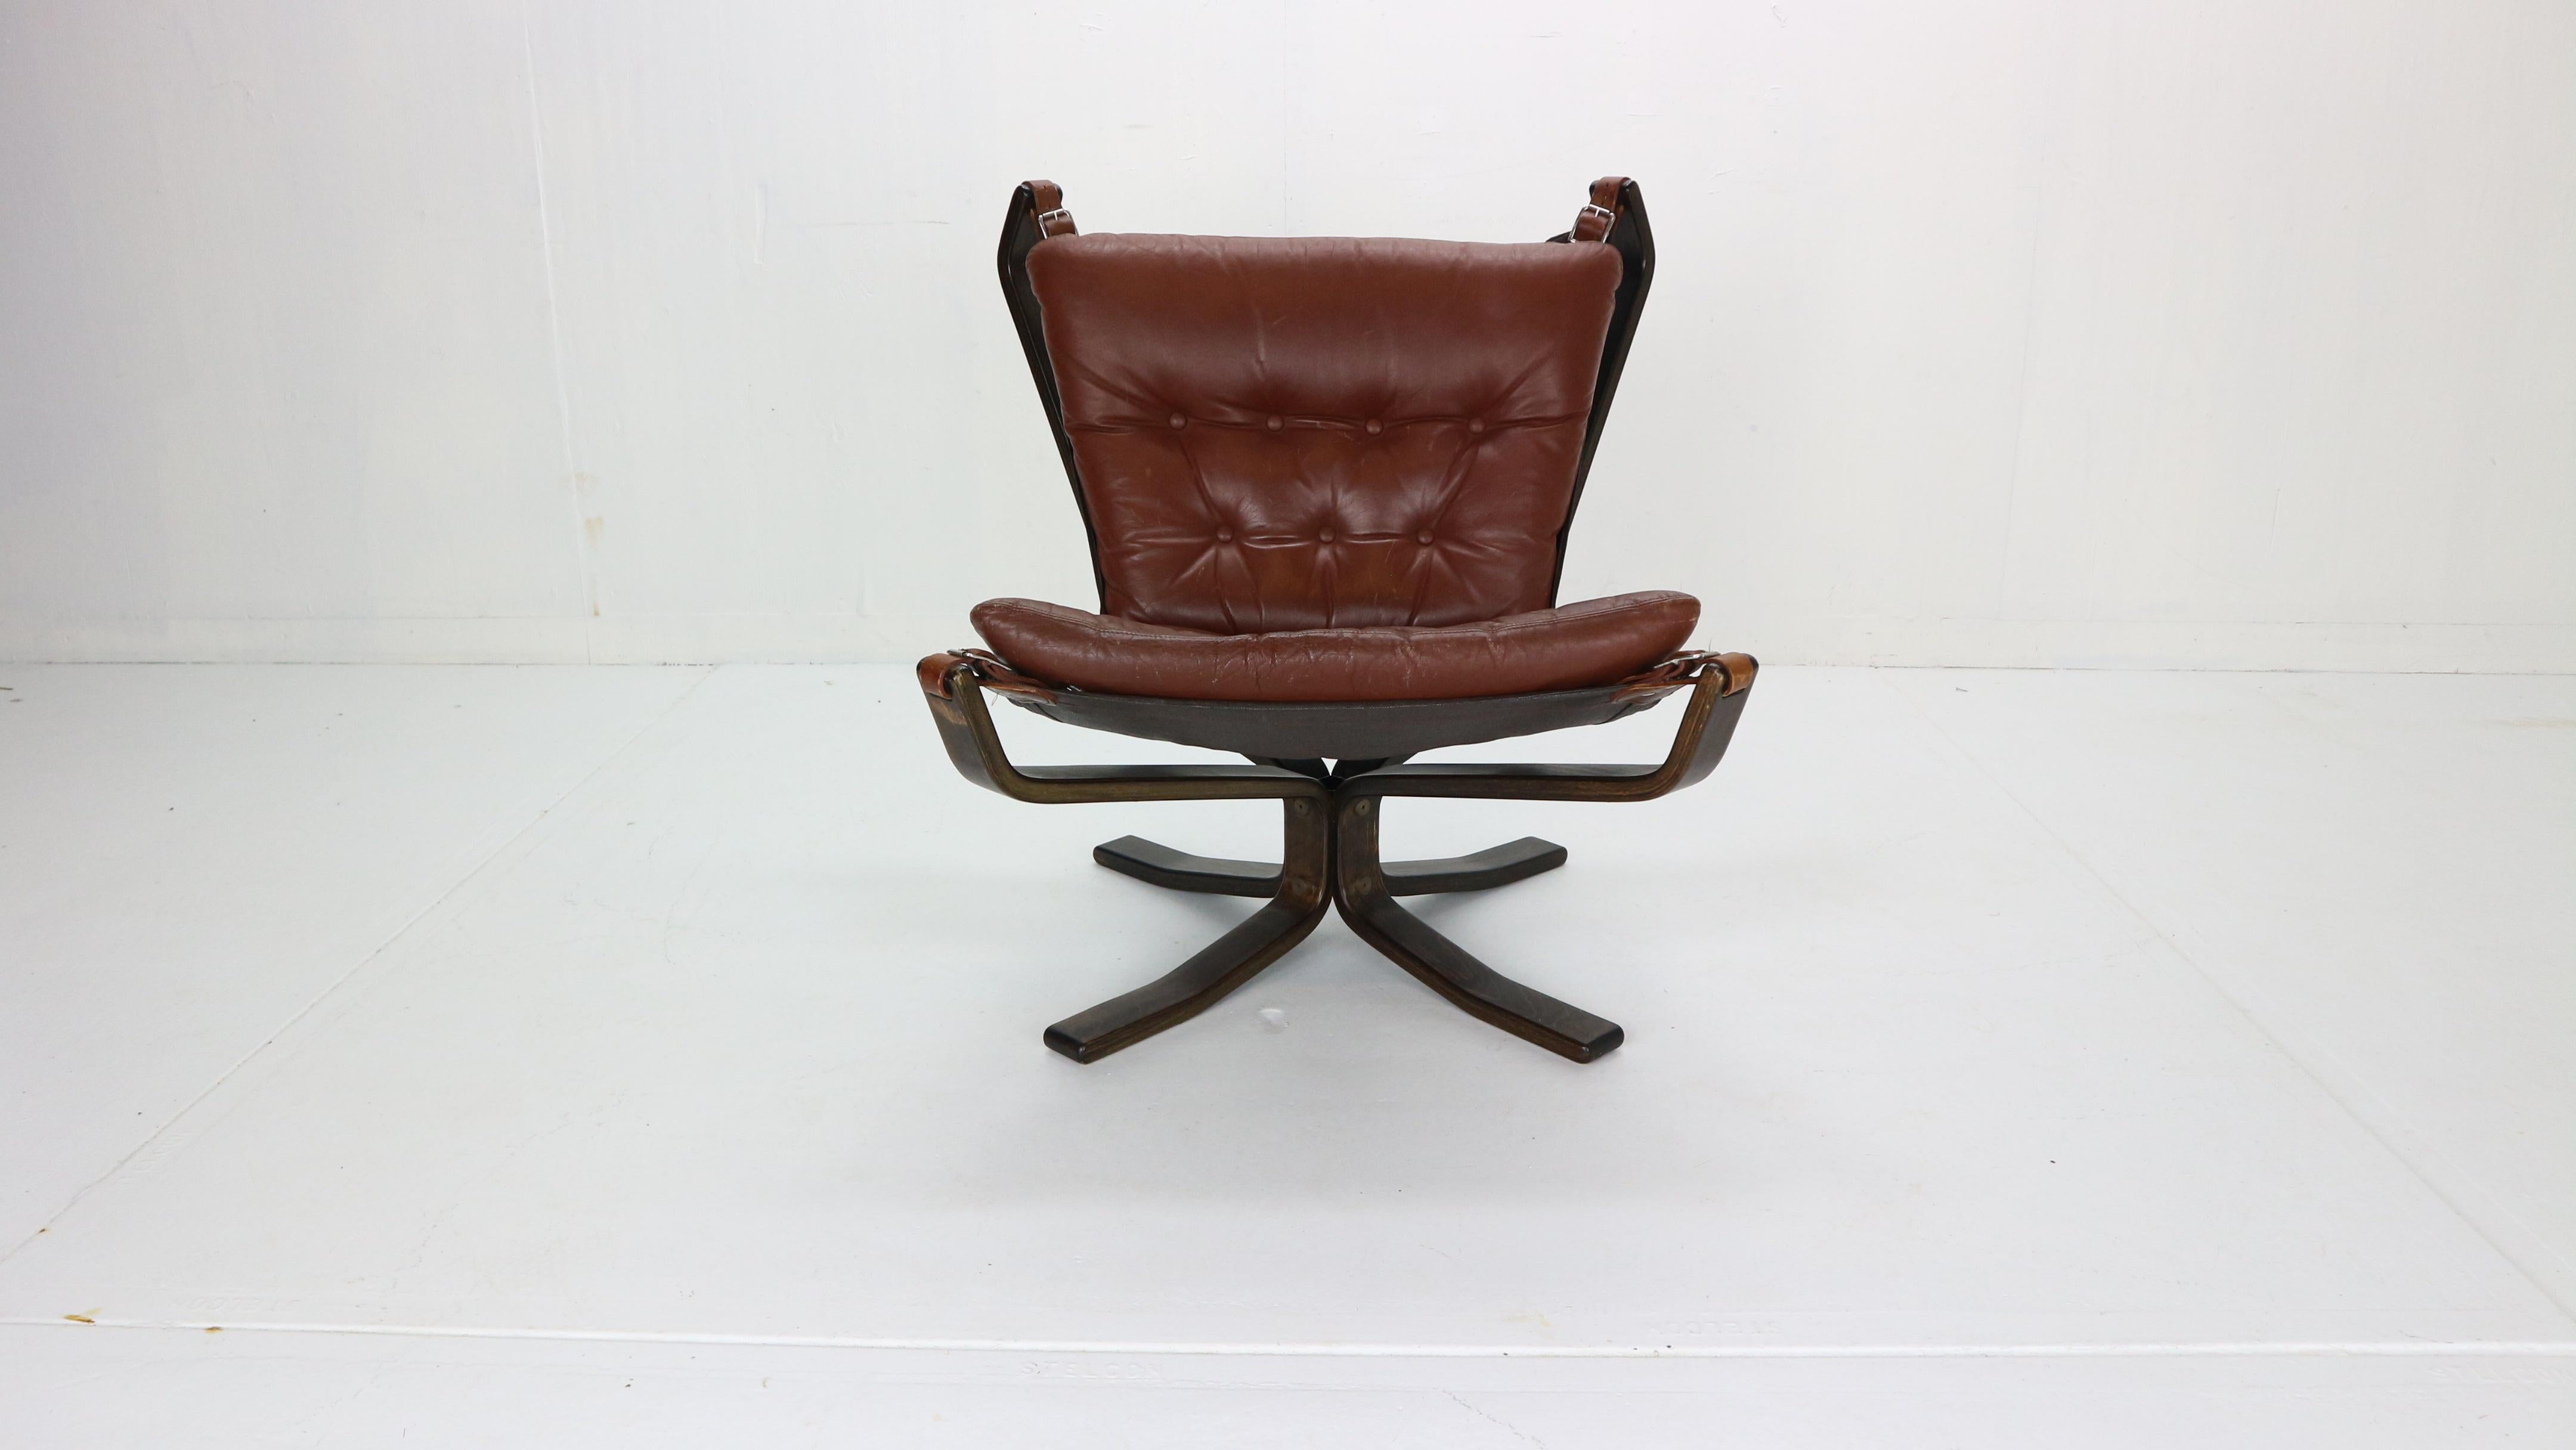 Scandinavian Modern Sigurd Ressell Falcon Brown Leather Lounge Chair for Vatne Møbler, 1970, Norway